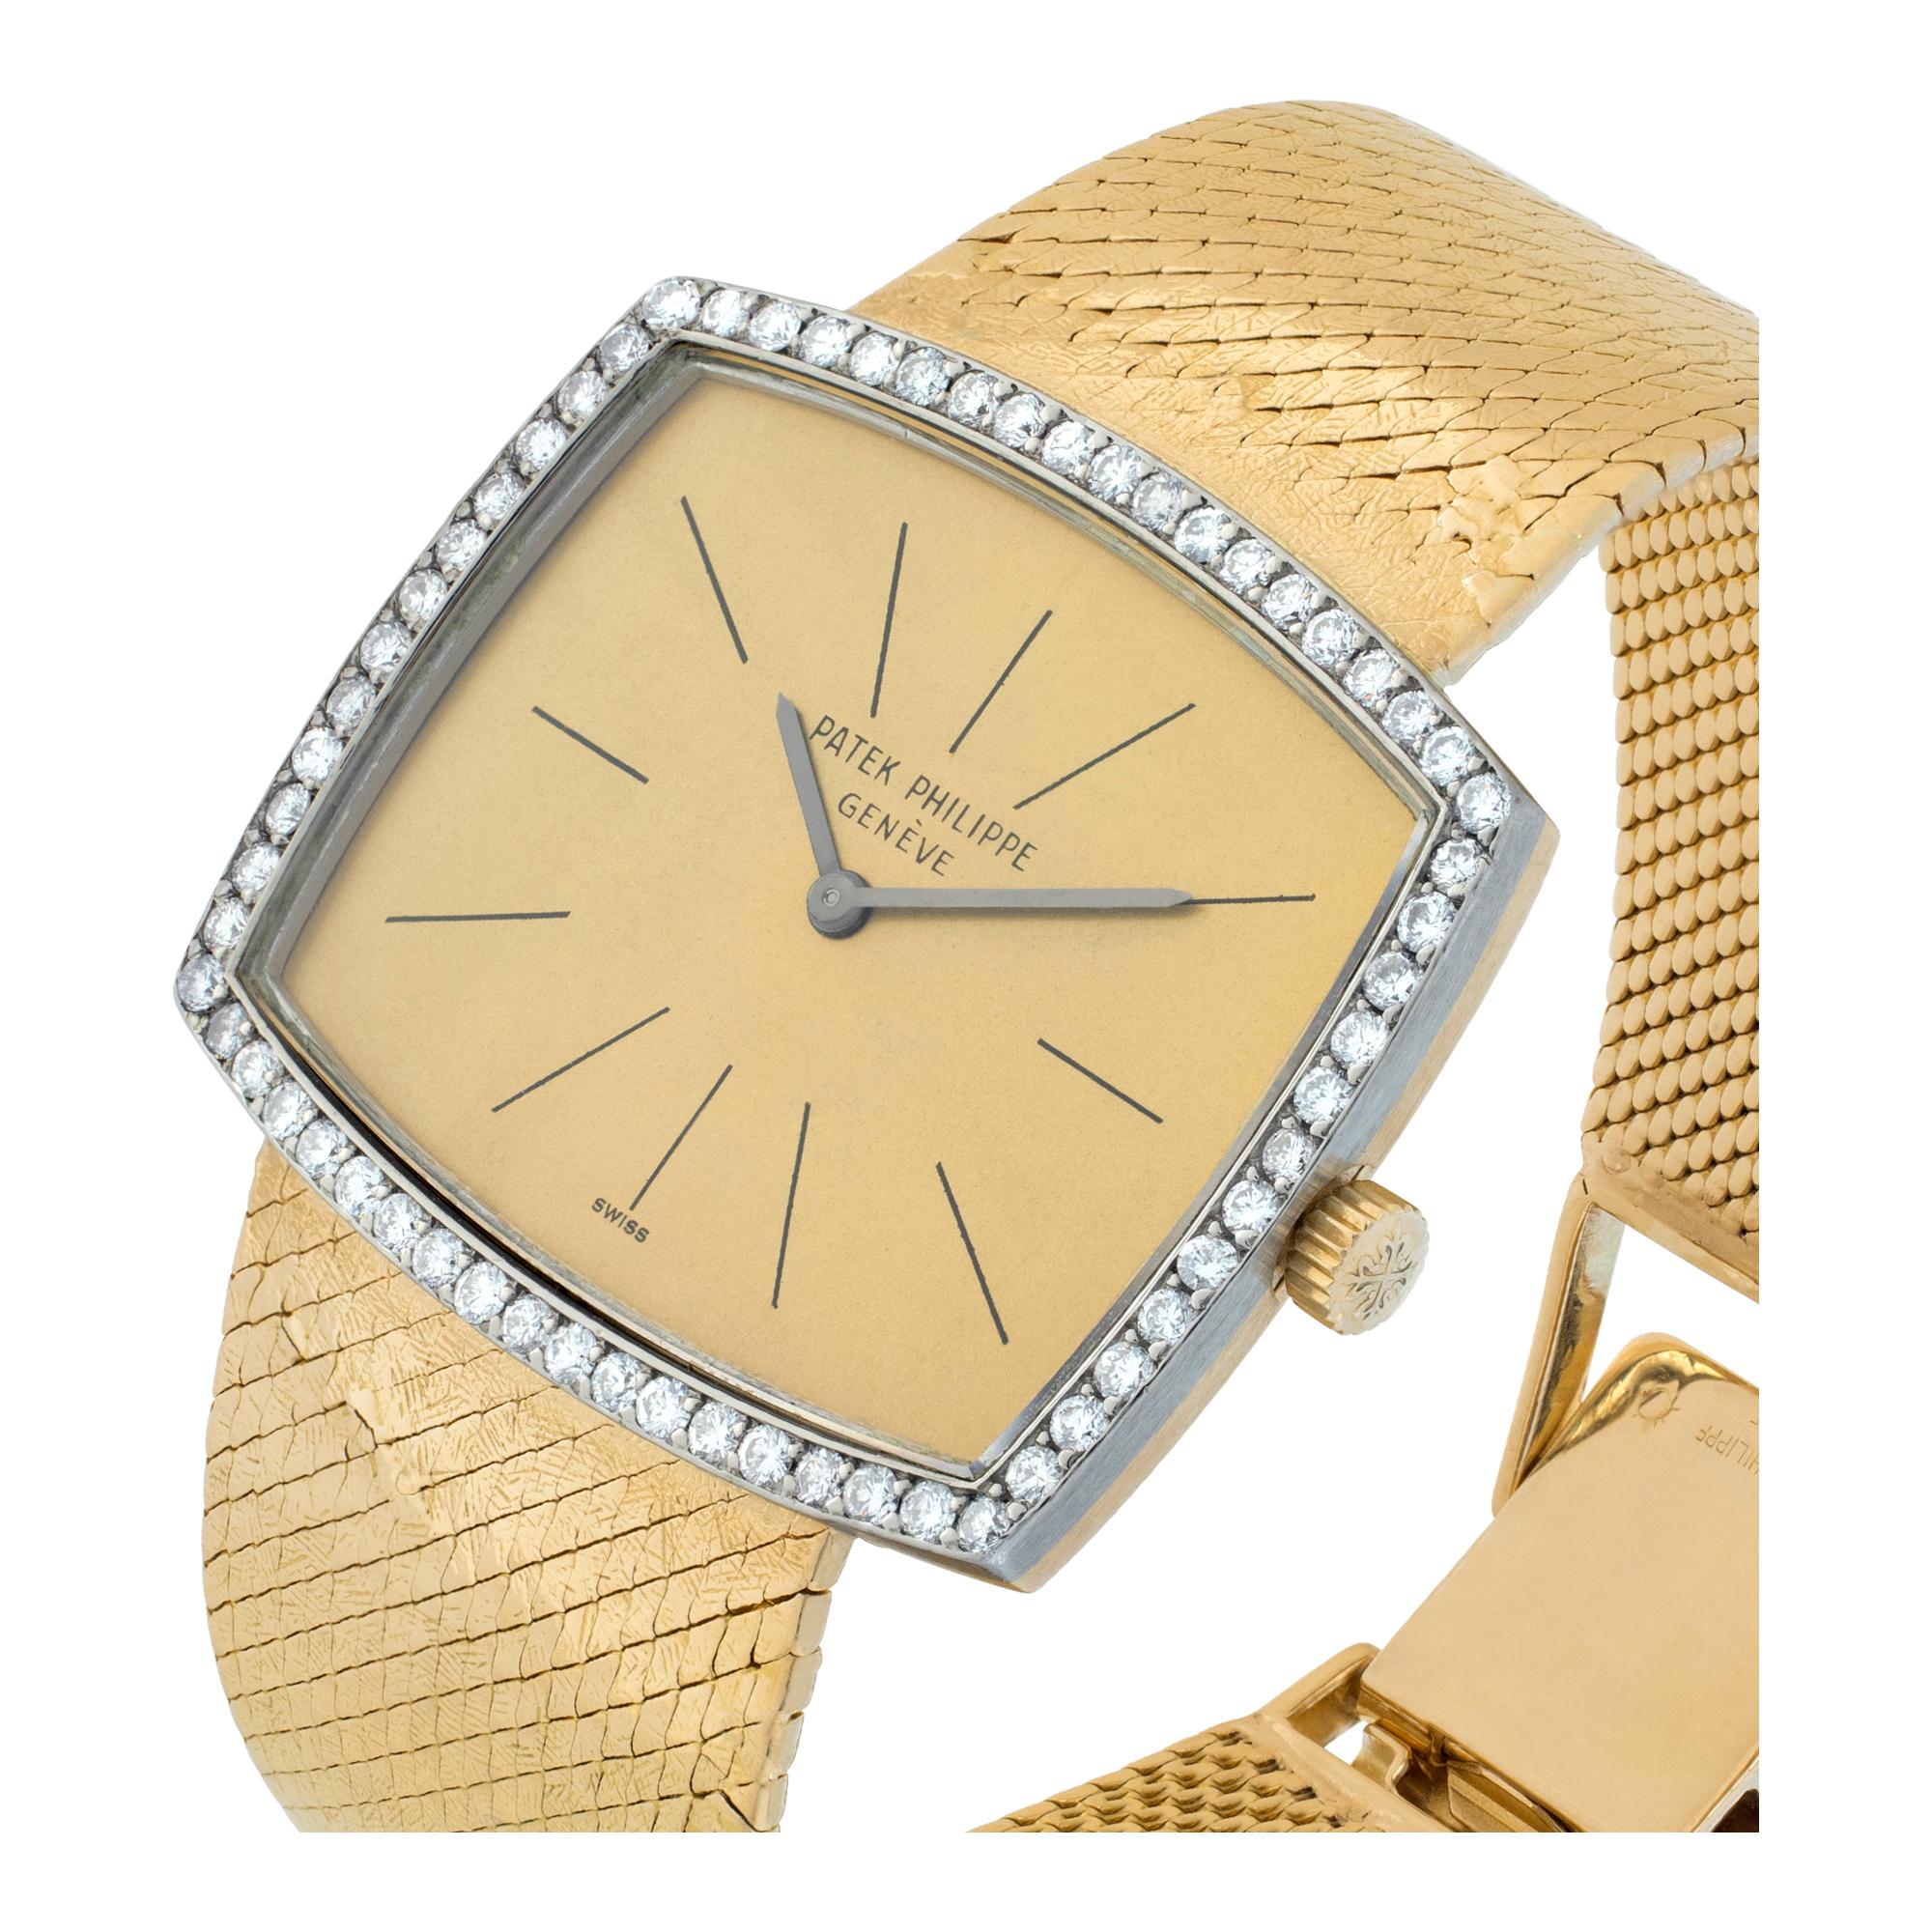 Patek Philippe Classic with diamond bezel in 18k with refinished dial. Manual. Fits 6 inches wrist. Ref 3528/2. Circa 1967. Fine Pre-owned Patek Philippe Watch. Certified preowned Vintage Patek Philippe Square 3528/2 watch is made out of yellow gold